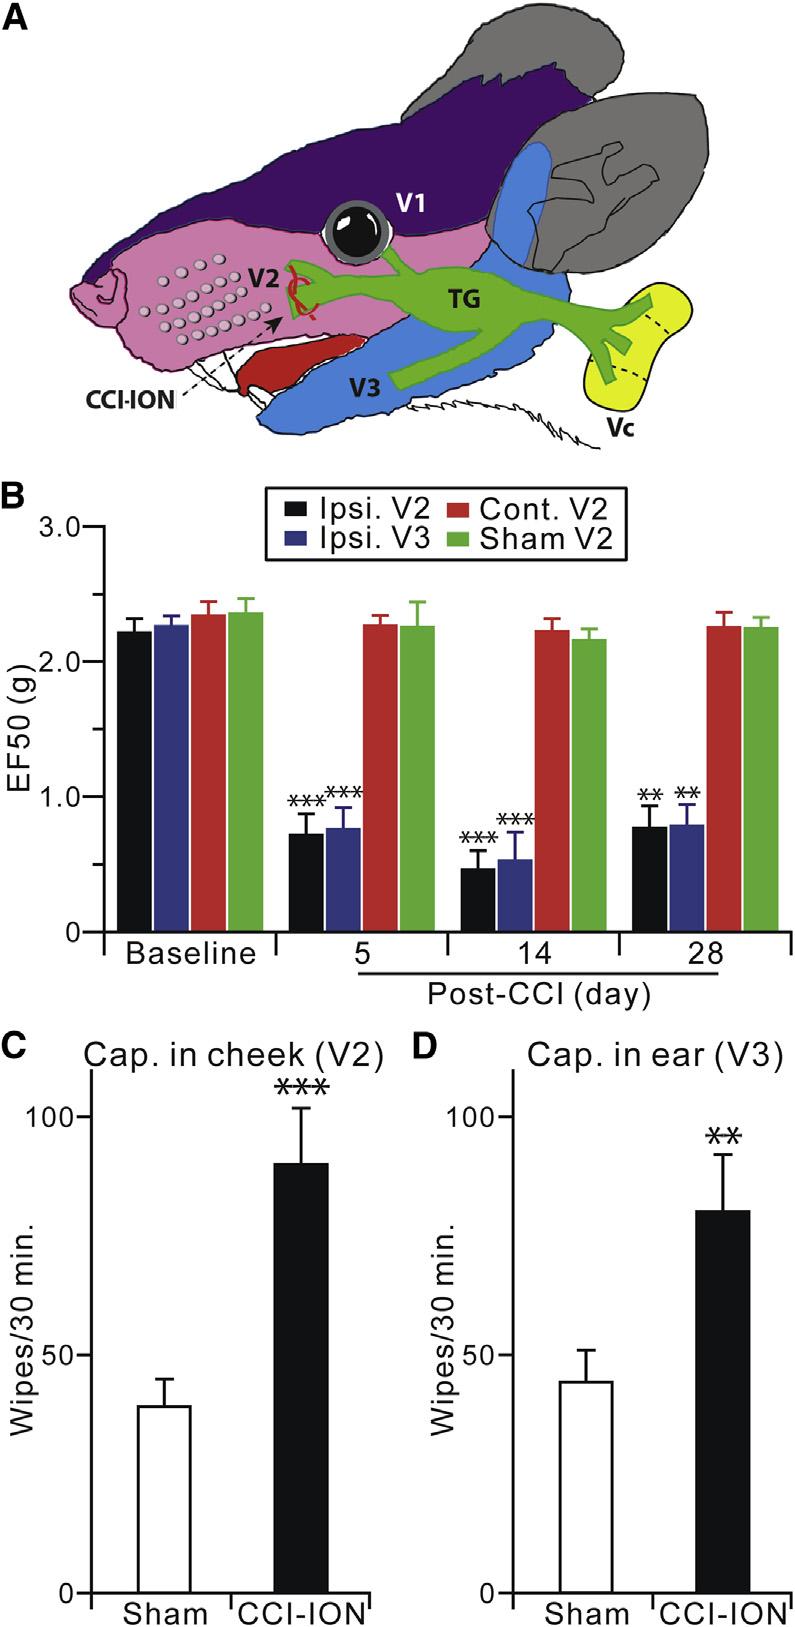 pain mechanism in which descending 5-HT from the RVM maintains central terminal sensitization by activation of presynaptic 5-HT3A receptors and subsequent facilitation of TRPV1 activity.